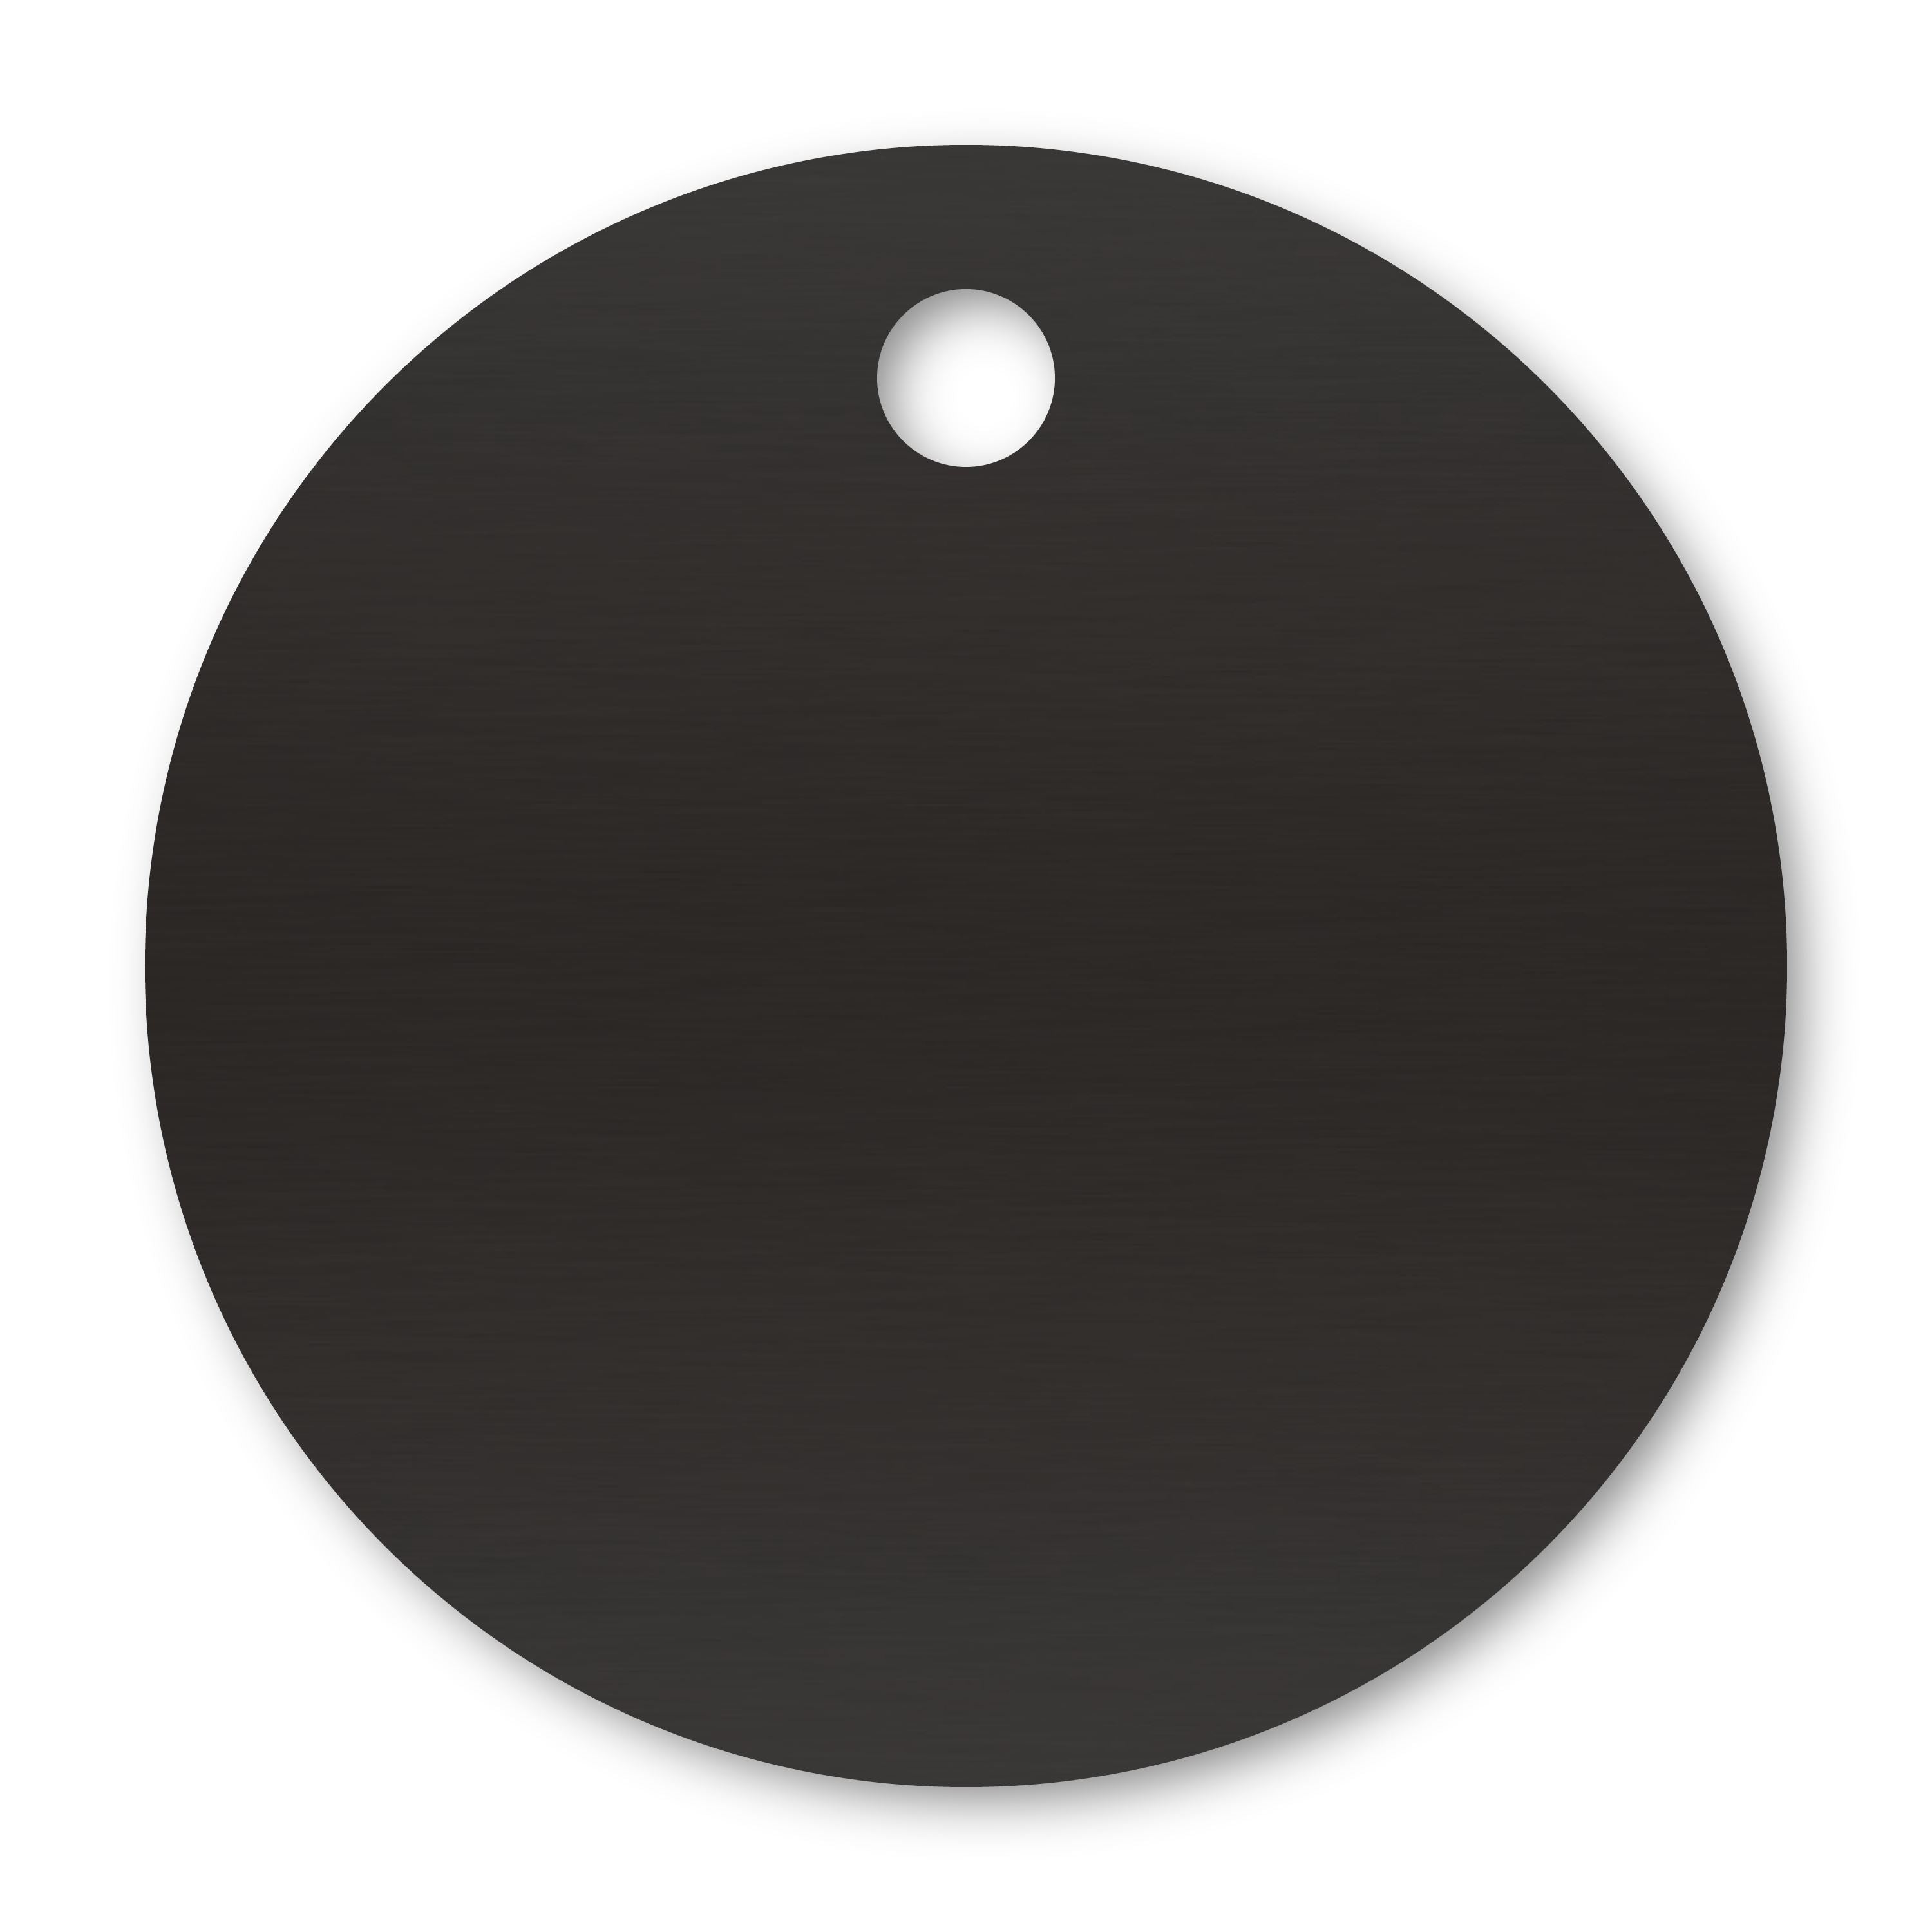 Anodized Aluminum Round Tags, 1-1/2" with 1/8" Hole, Laser Engraved Metal Tags Craftworks NW Black 